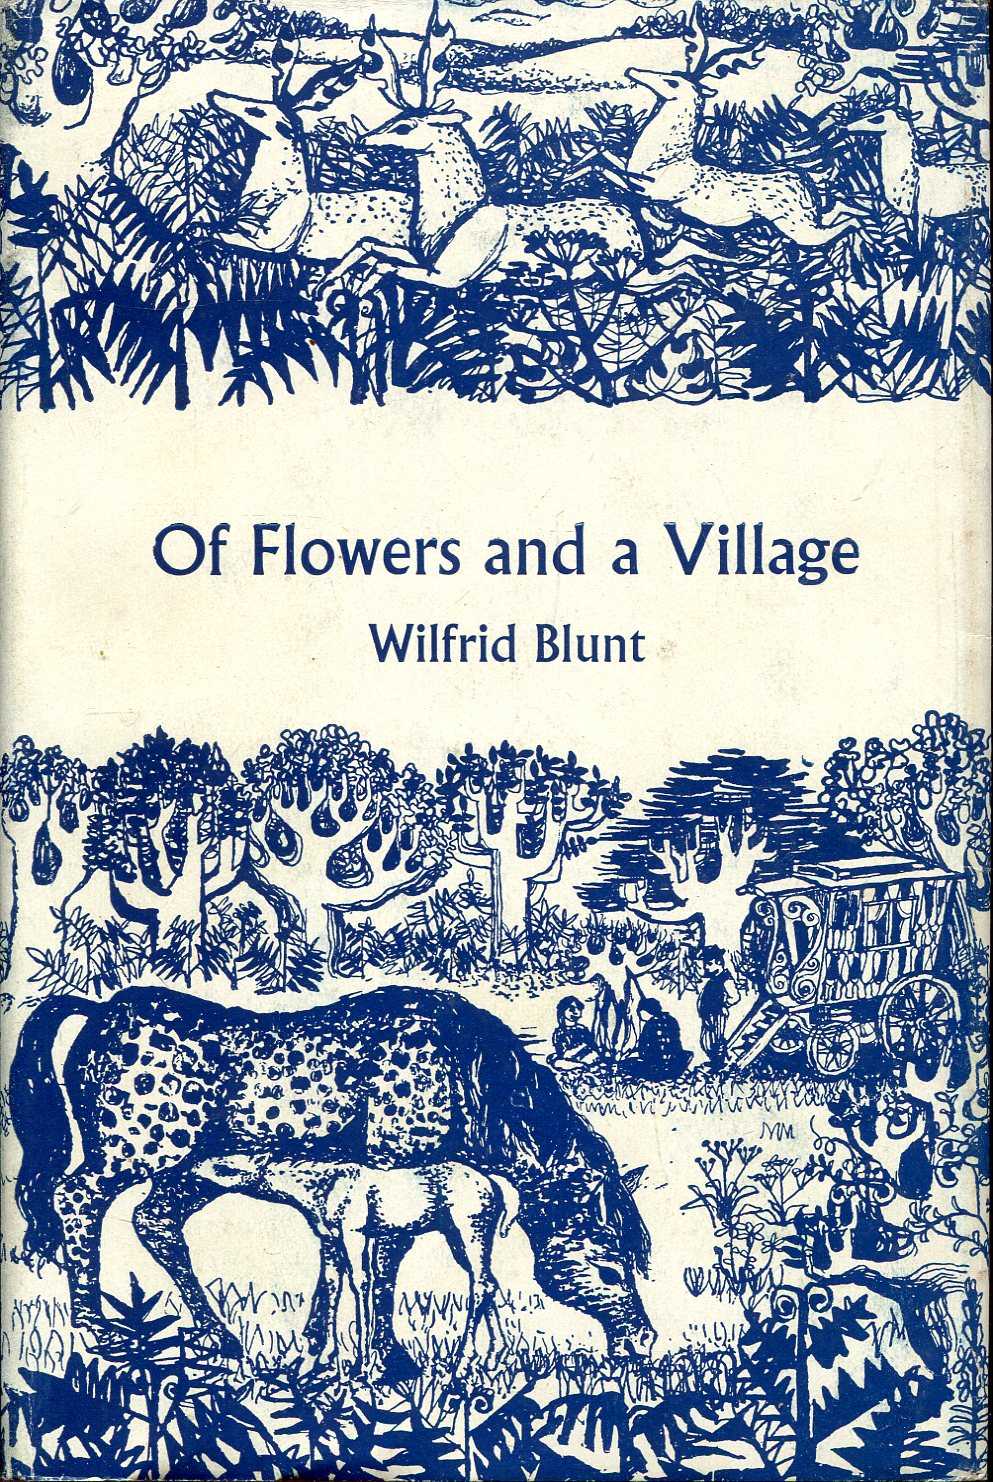 Of Flowers & A Village, an entertainment for flower lovers - Blunt, Wilfrid